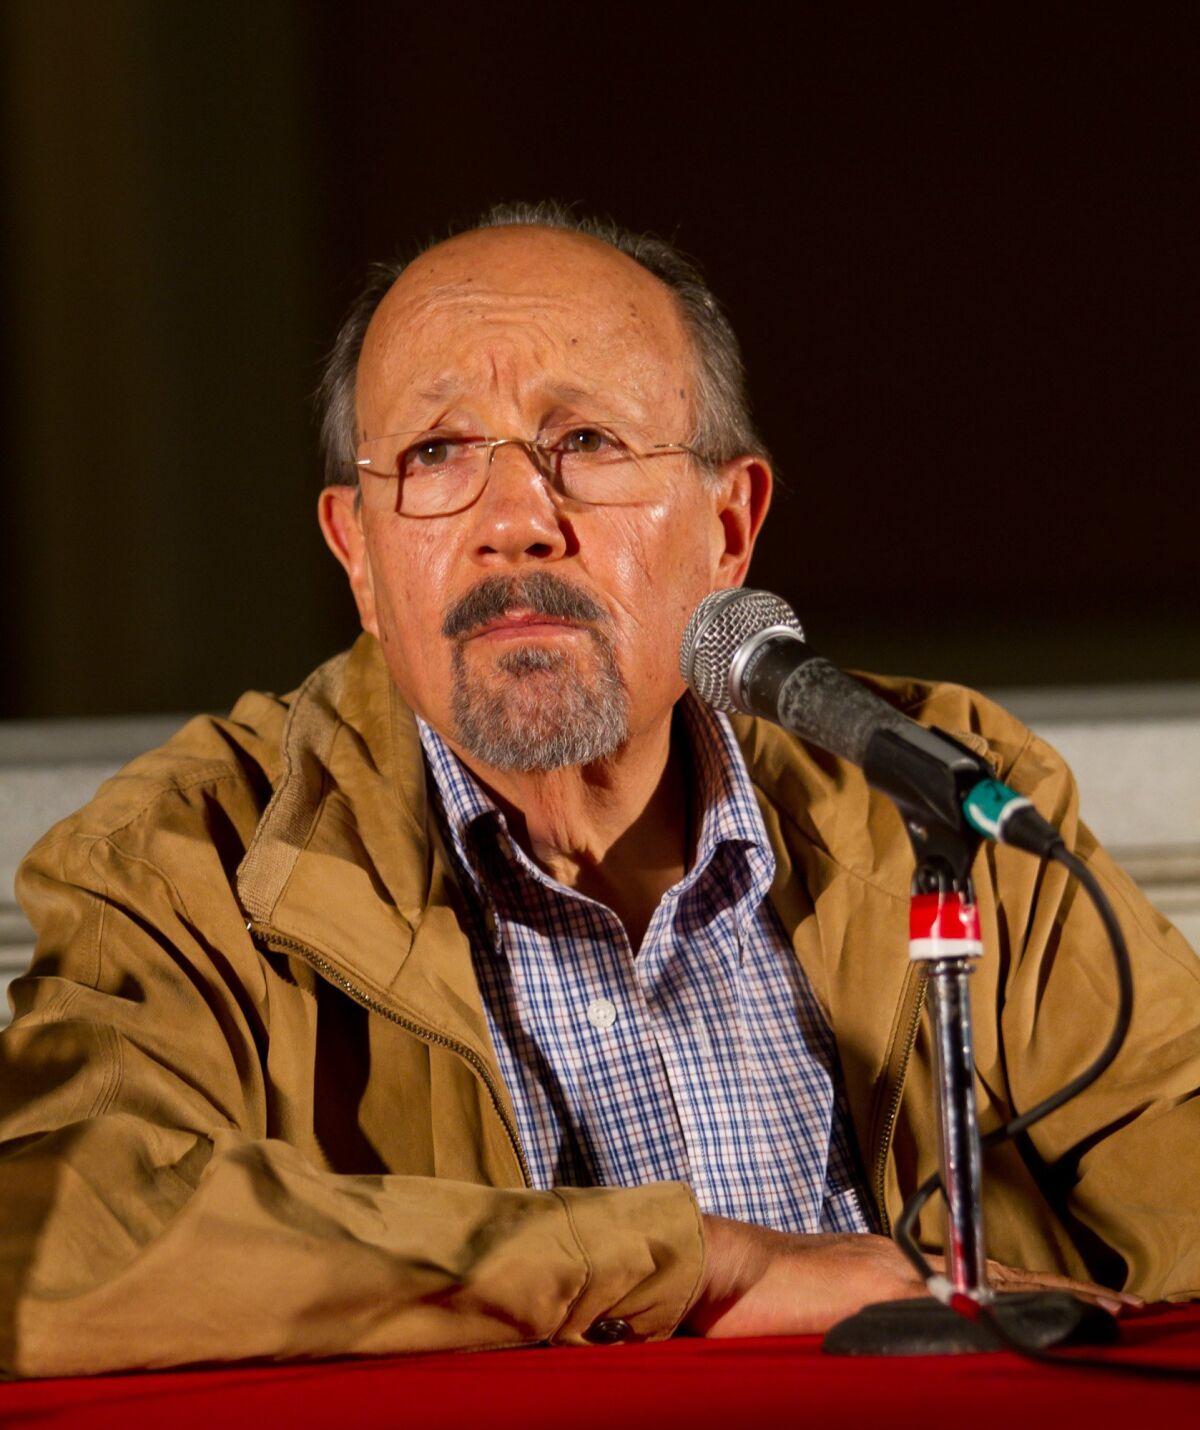 An elderly man in a brown jacket and a blue plaid shirt sits at a table with a microphone in front of him